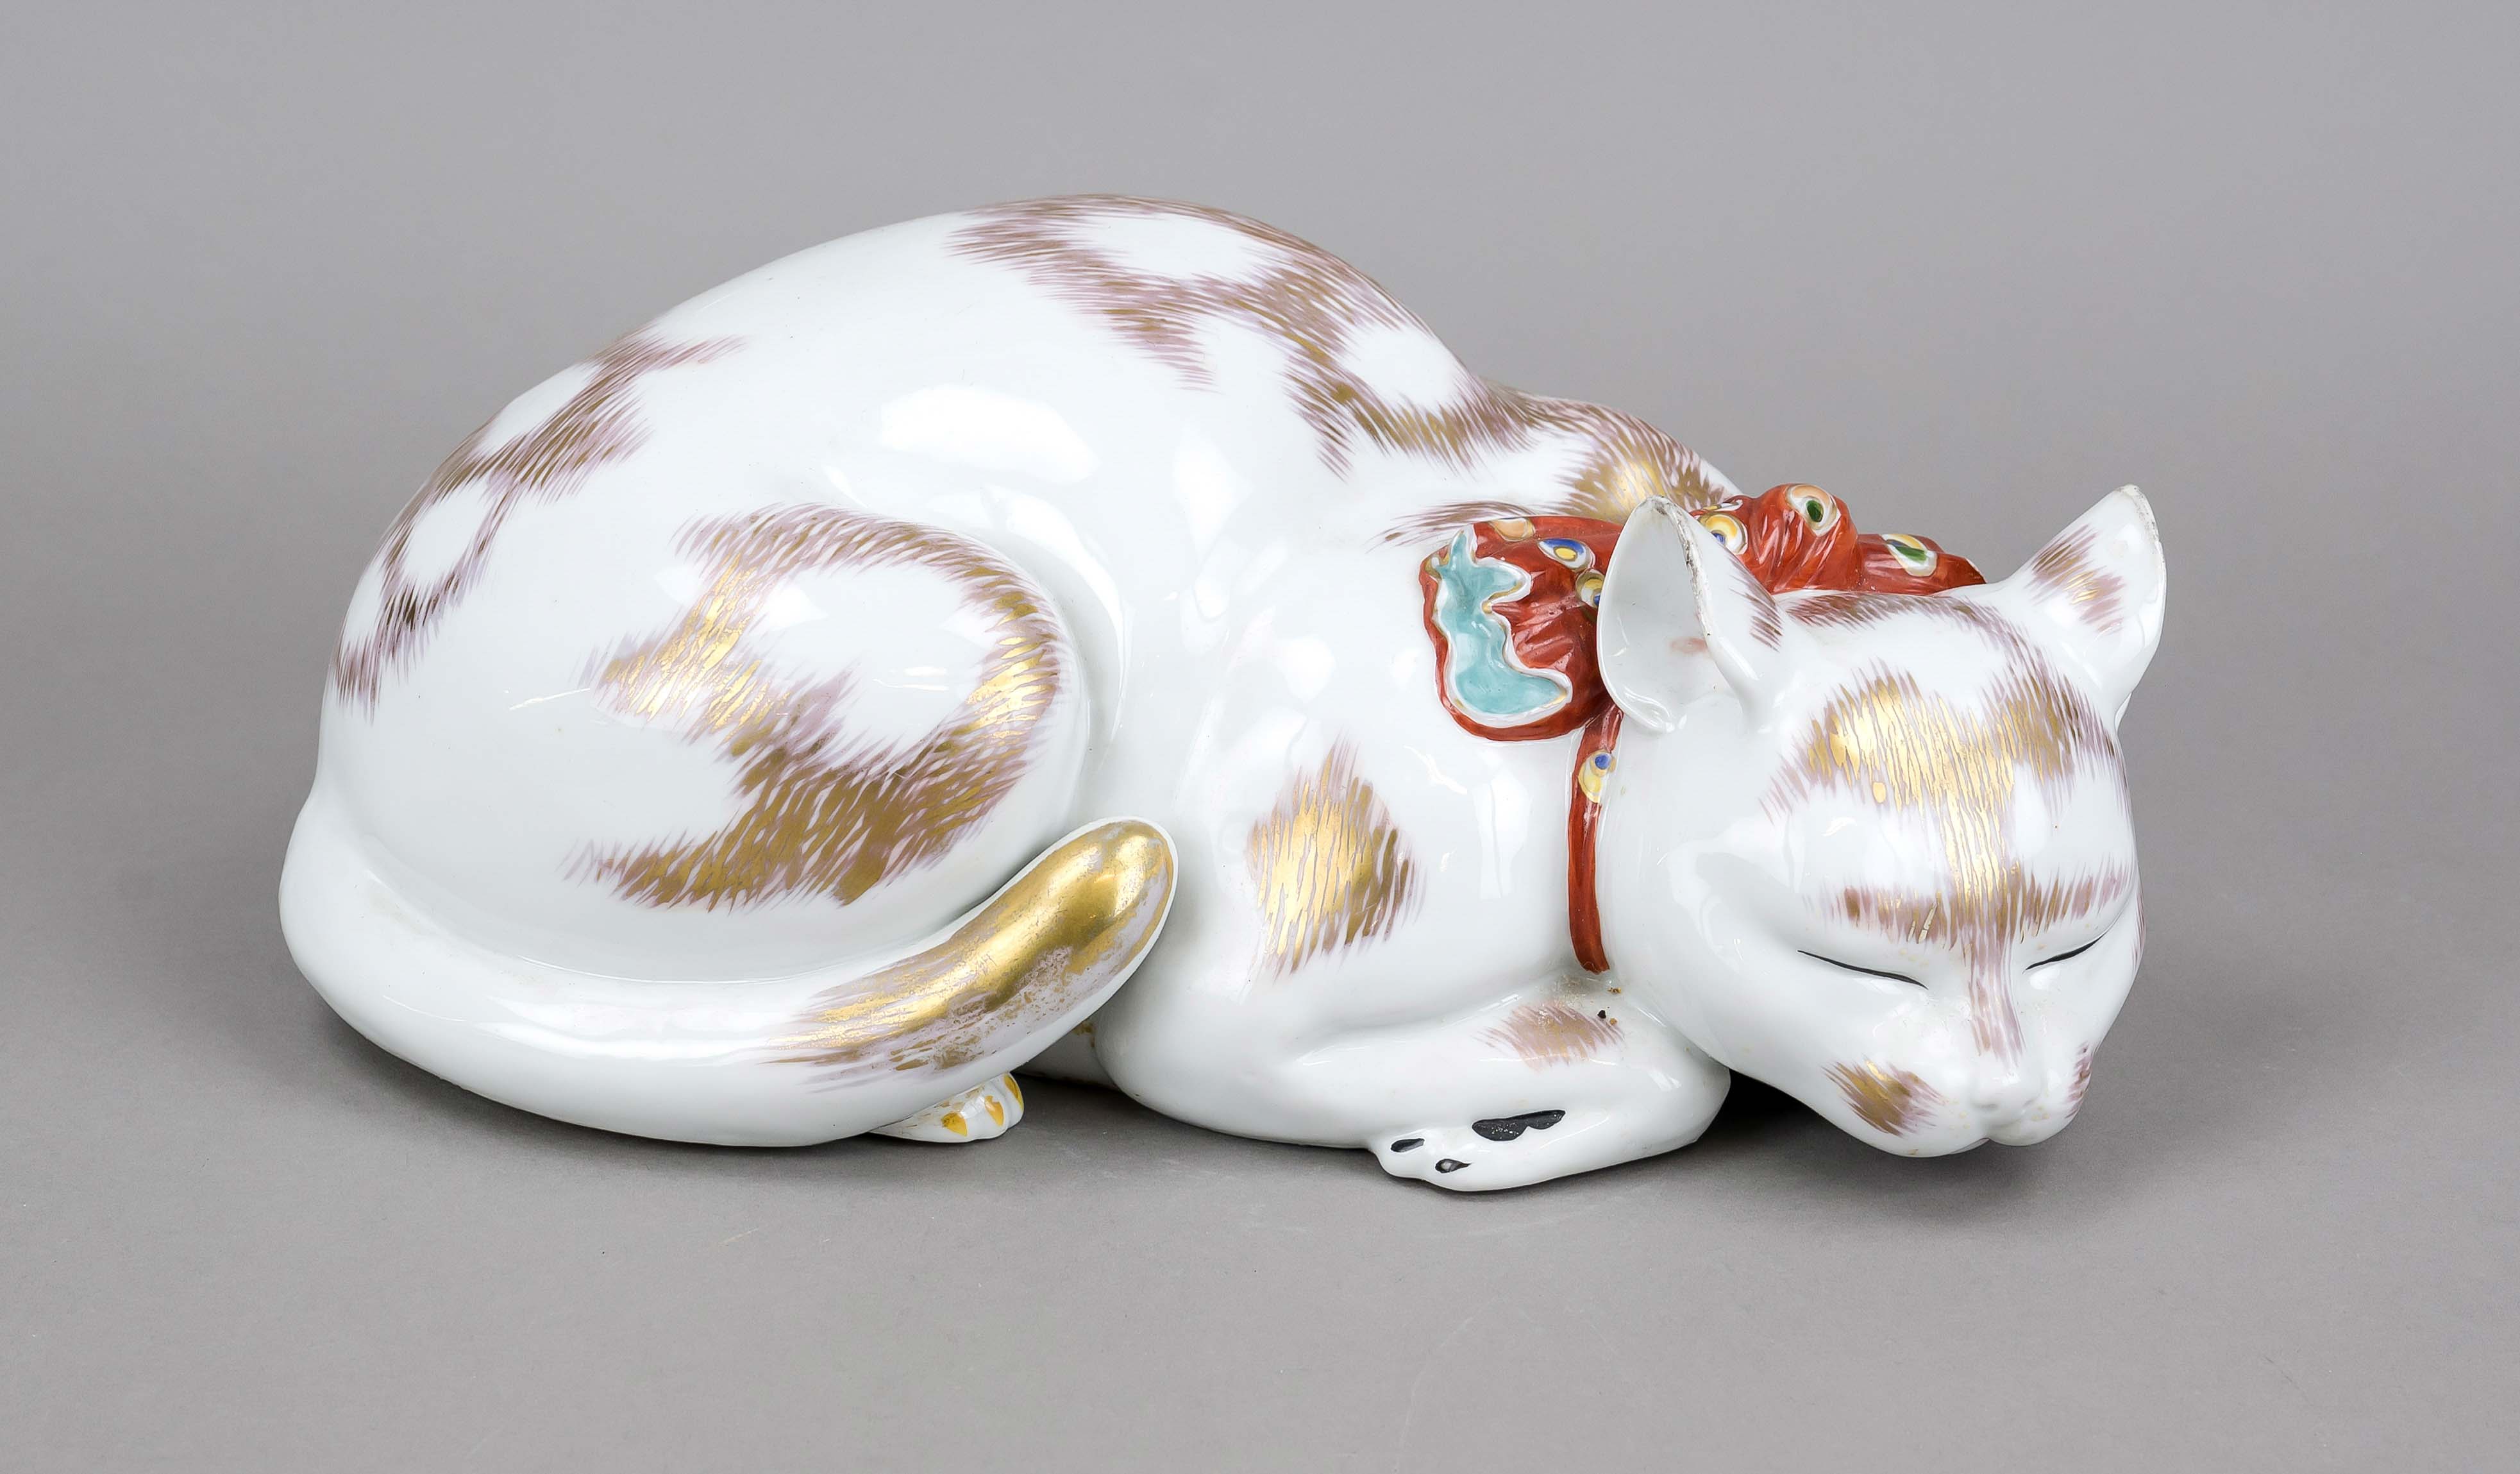 Sleeping cat, Japan (probably Satsuma) 1st half 20th century, polychrome and gold painted, l. 36 cm